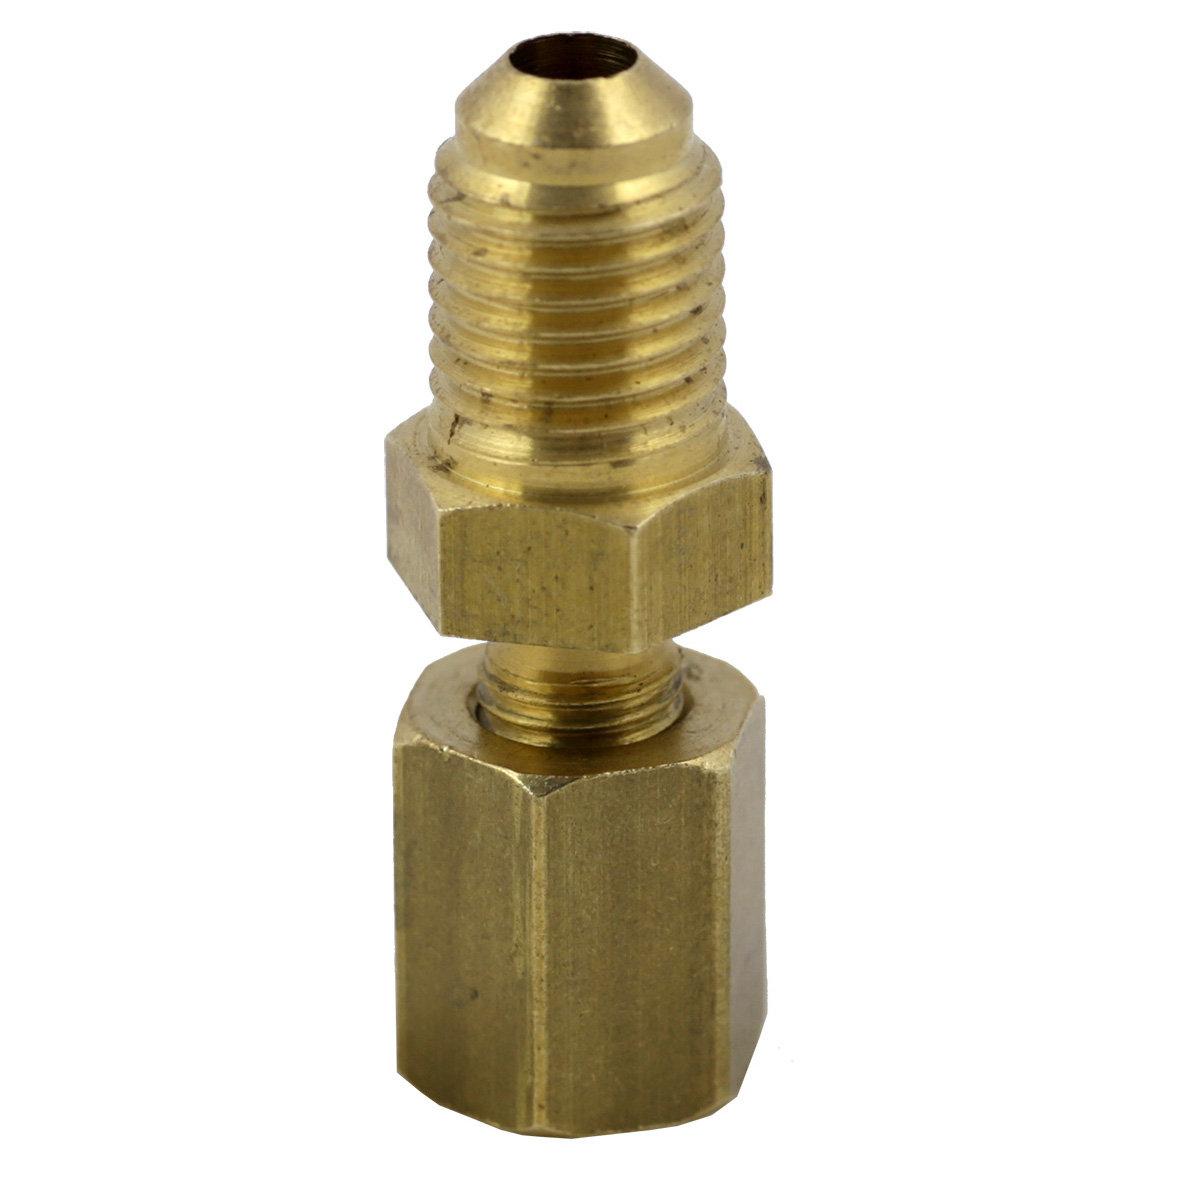 Adapter for aerosol/spray can, inlet 7/16 20 UNEF (female), outlet 1/4 SAE (male) - RAC (R134a, R22, R600A, R290)